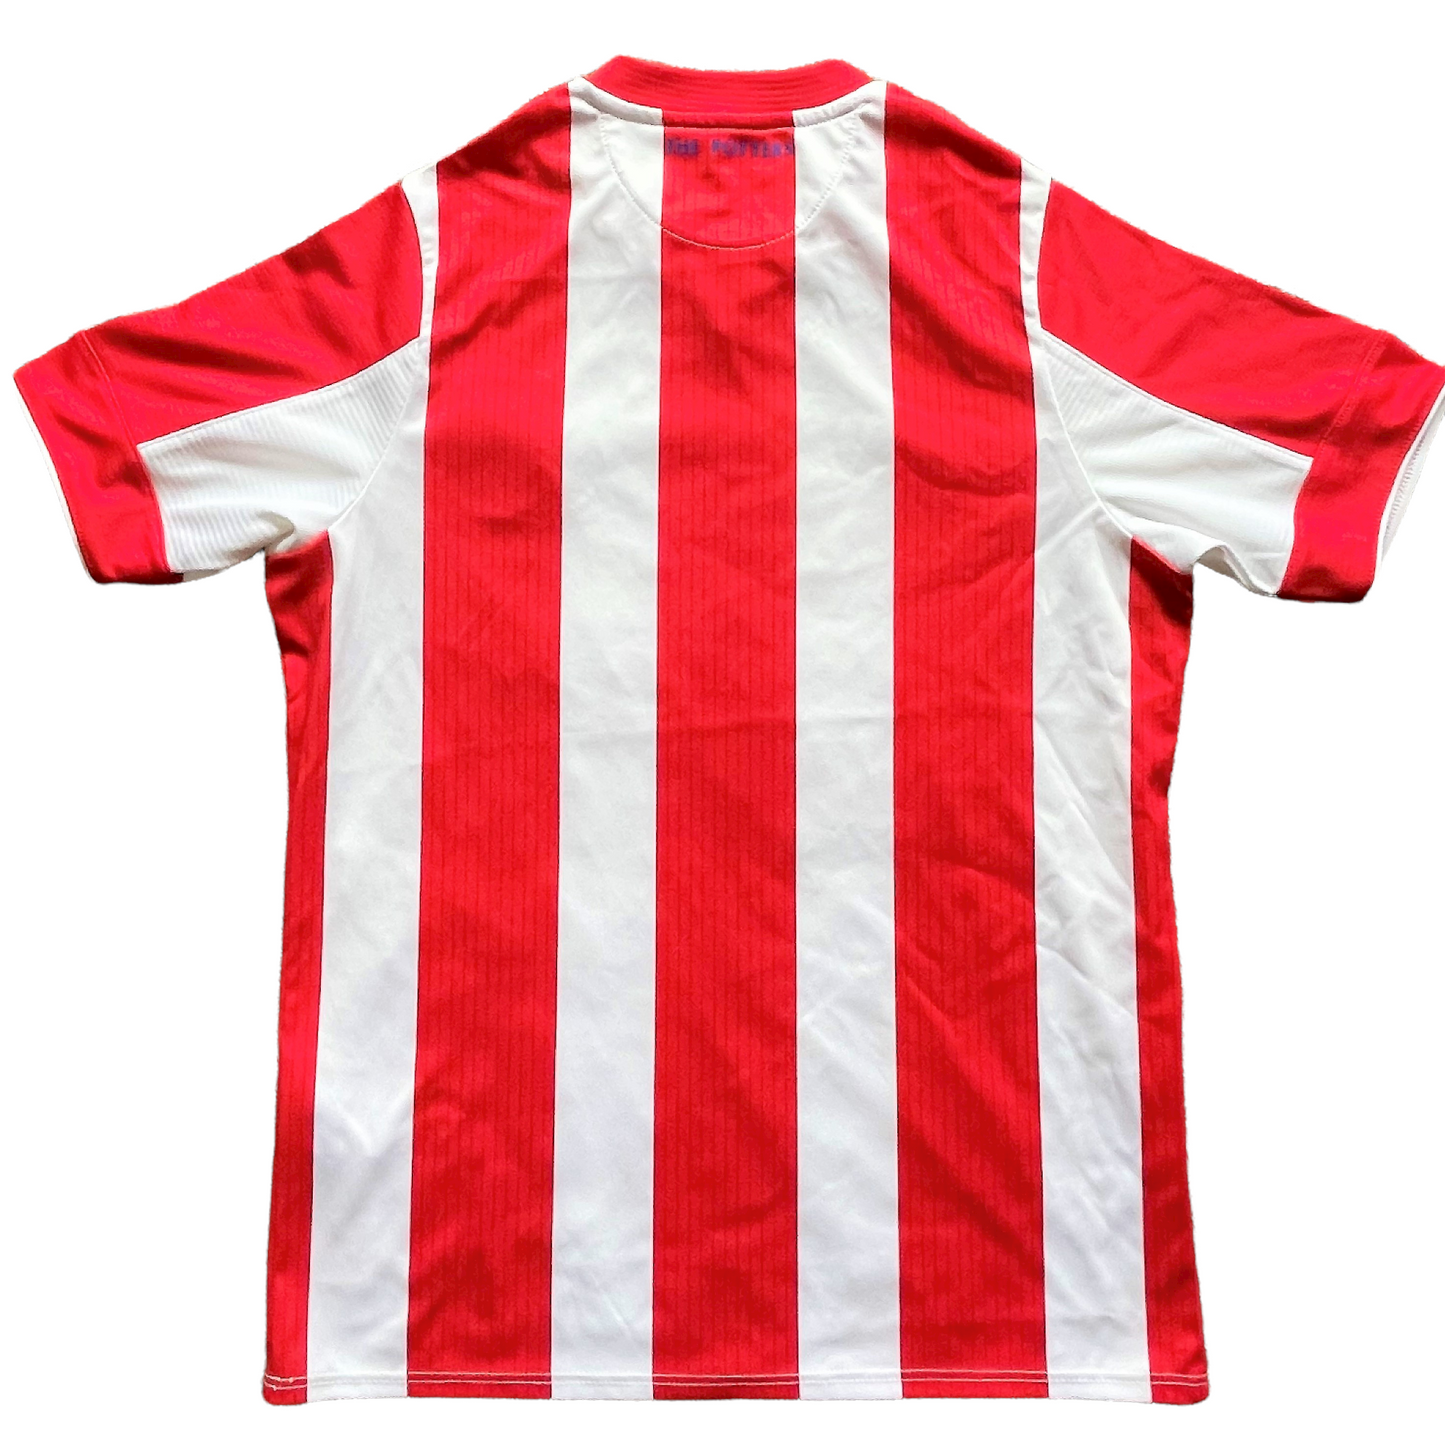 Stoke City 2015 Home Shirt (excellent) Small Boys. Height 18.5 inches